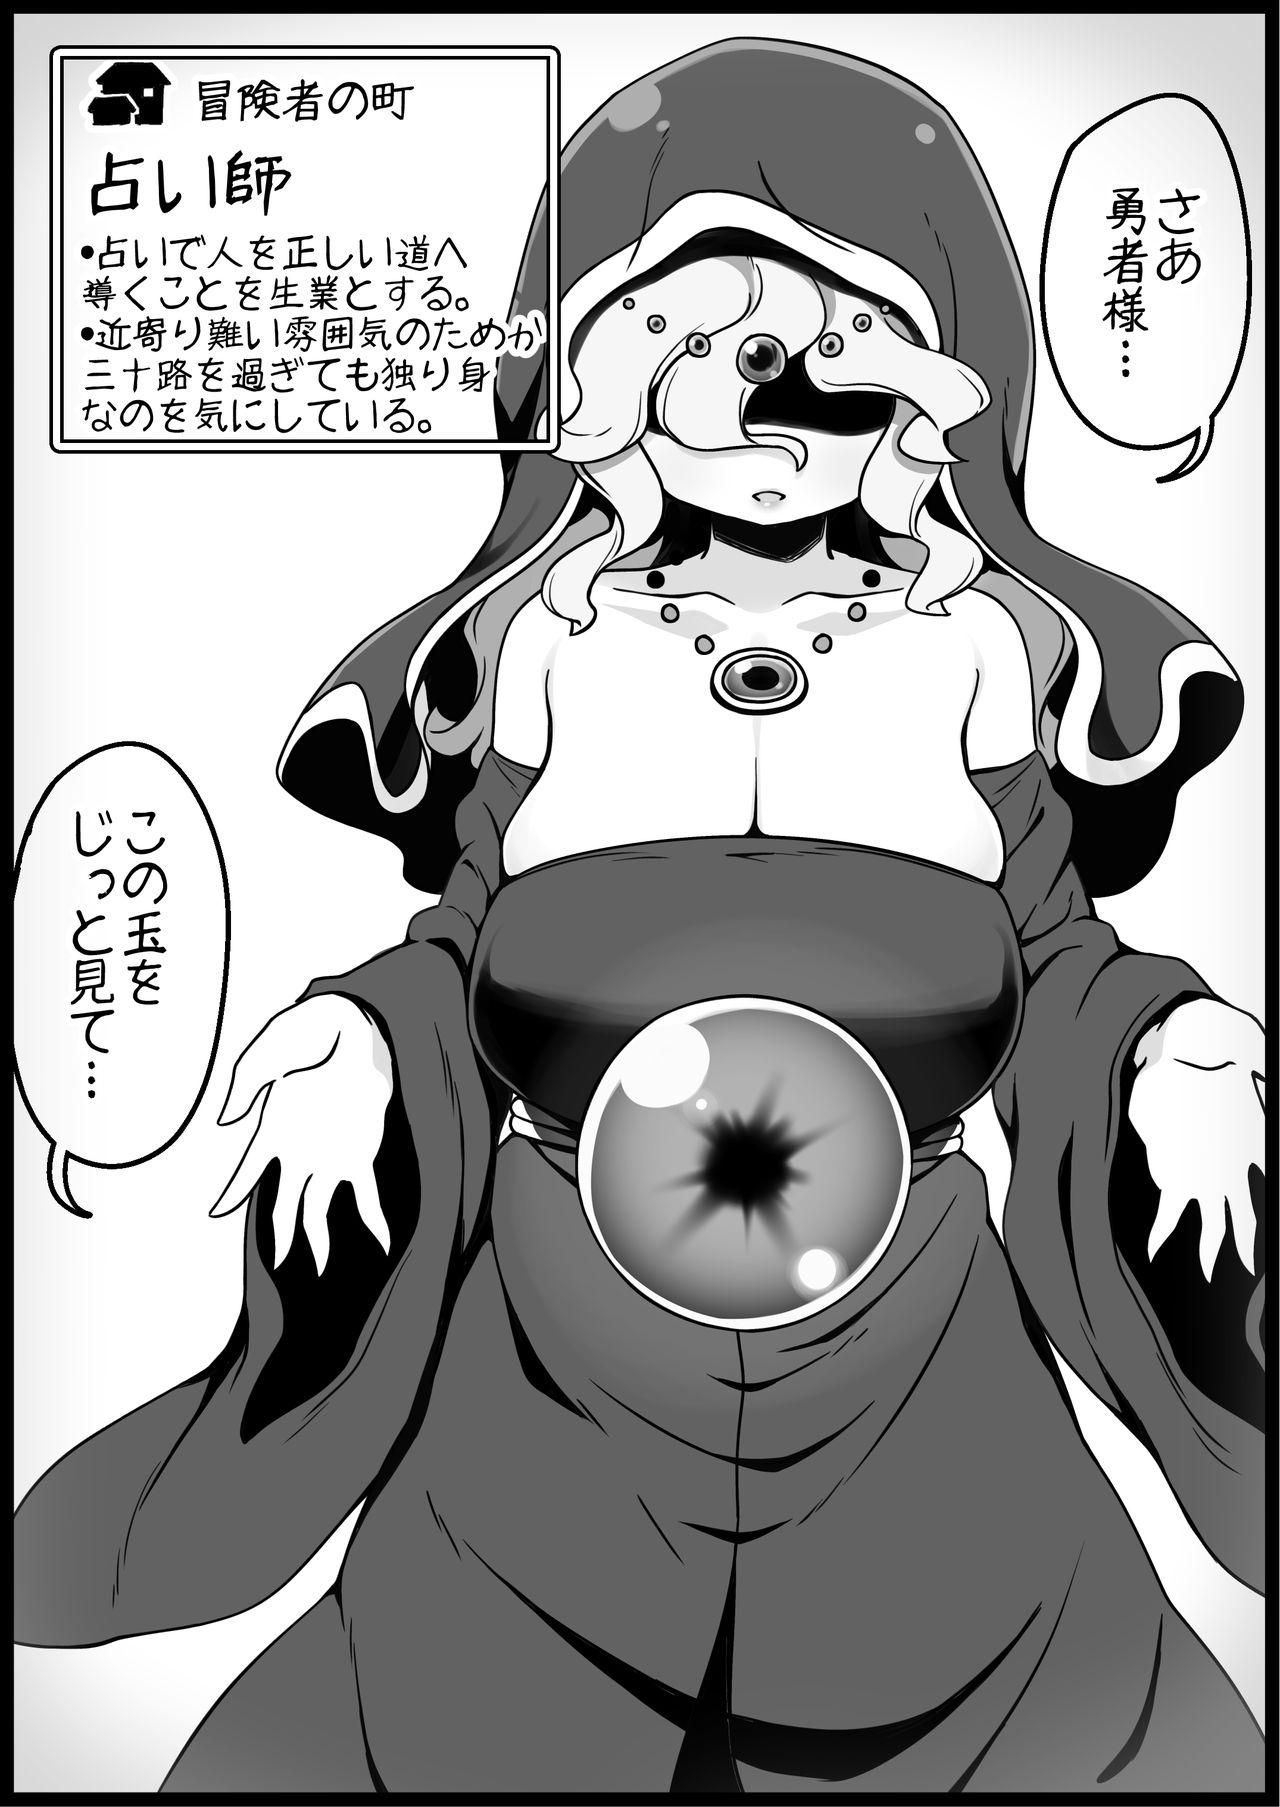 Amateurs Gone [Succubus Egg] Fantasy World 2 Too Forgiving to Heroes-Continued NPC (mob) Opponent-Centered Short H Manga Collection- - Original Novinhas - Page 6